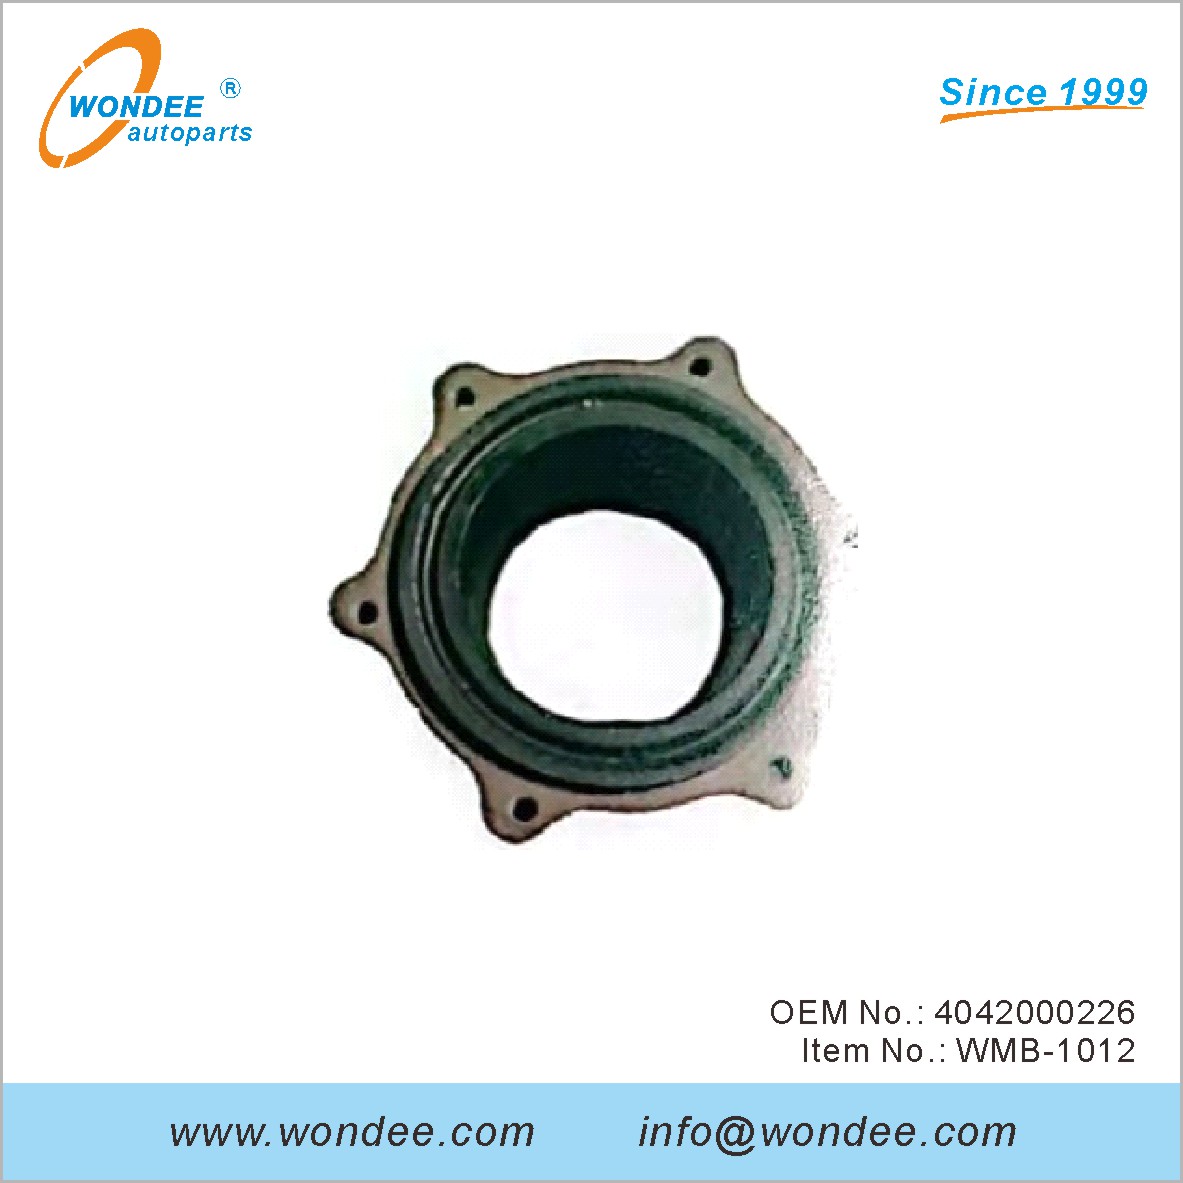 OEM 4042000226 for Benz from WONDEE